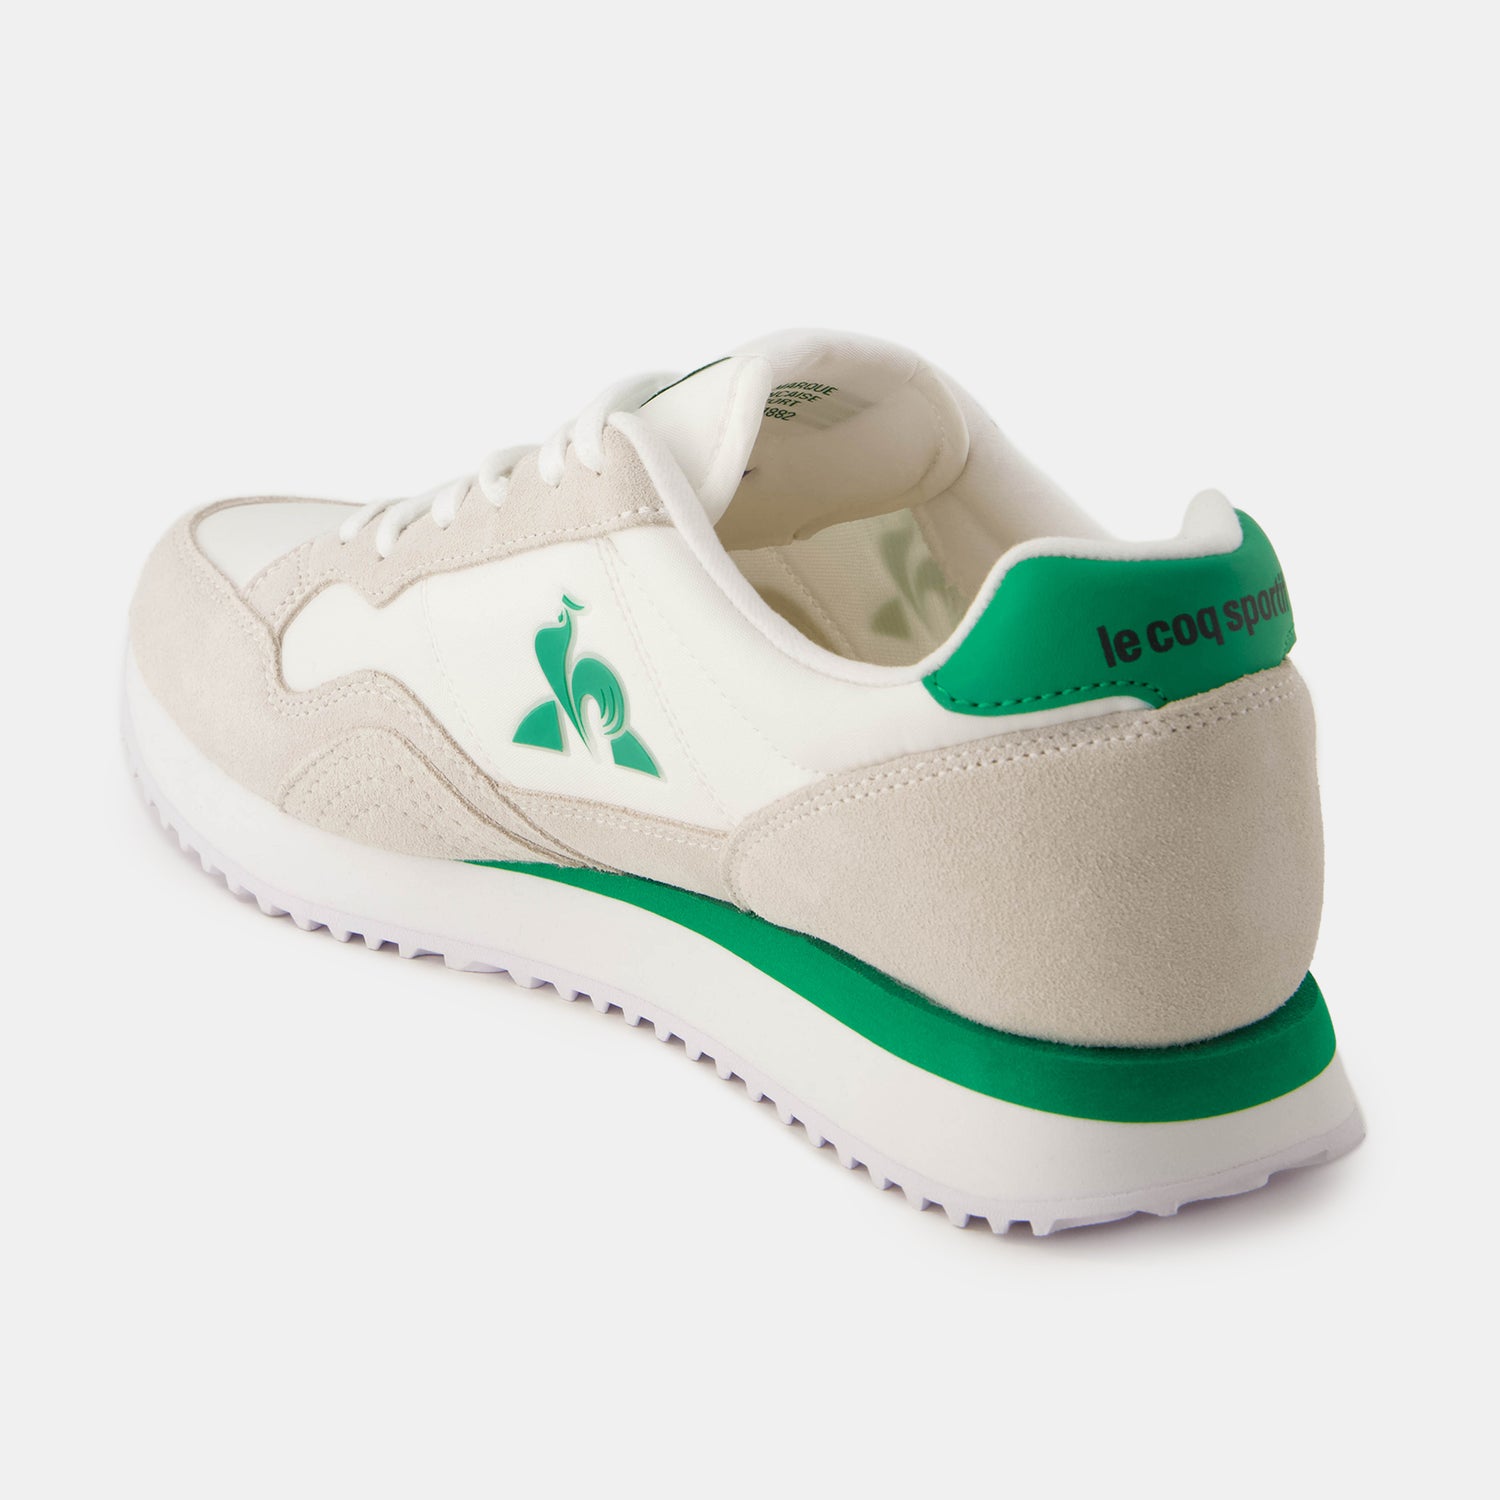 2410699-JET STAR_2 optical white/jolly green | Chaussures JET STAR_2 Homme